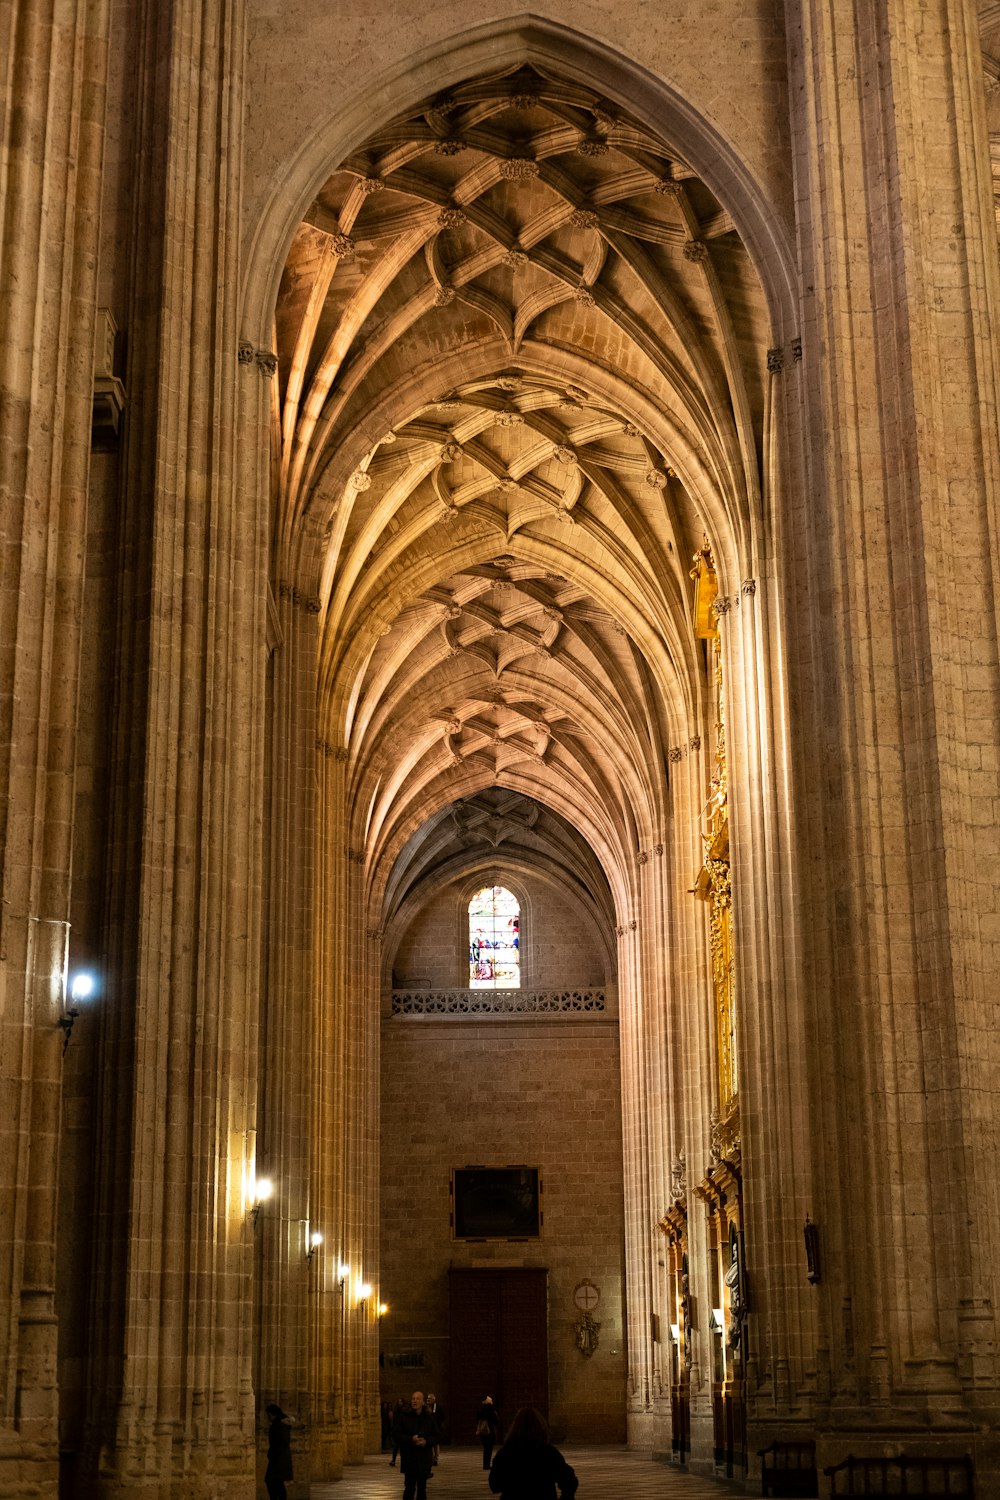 a very large cathedral with a very tall ceiling